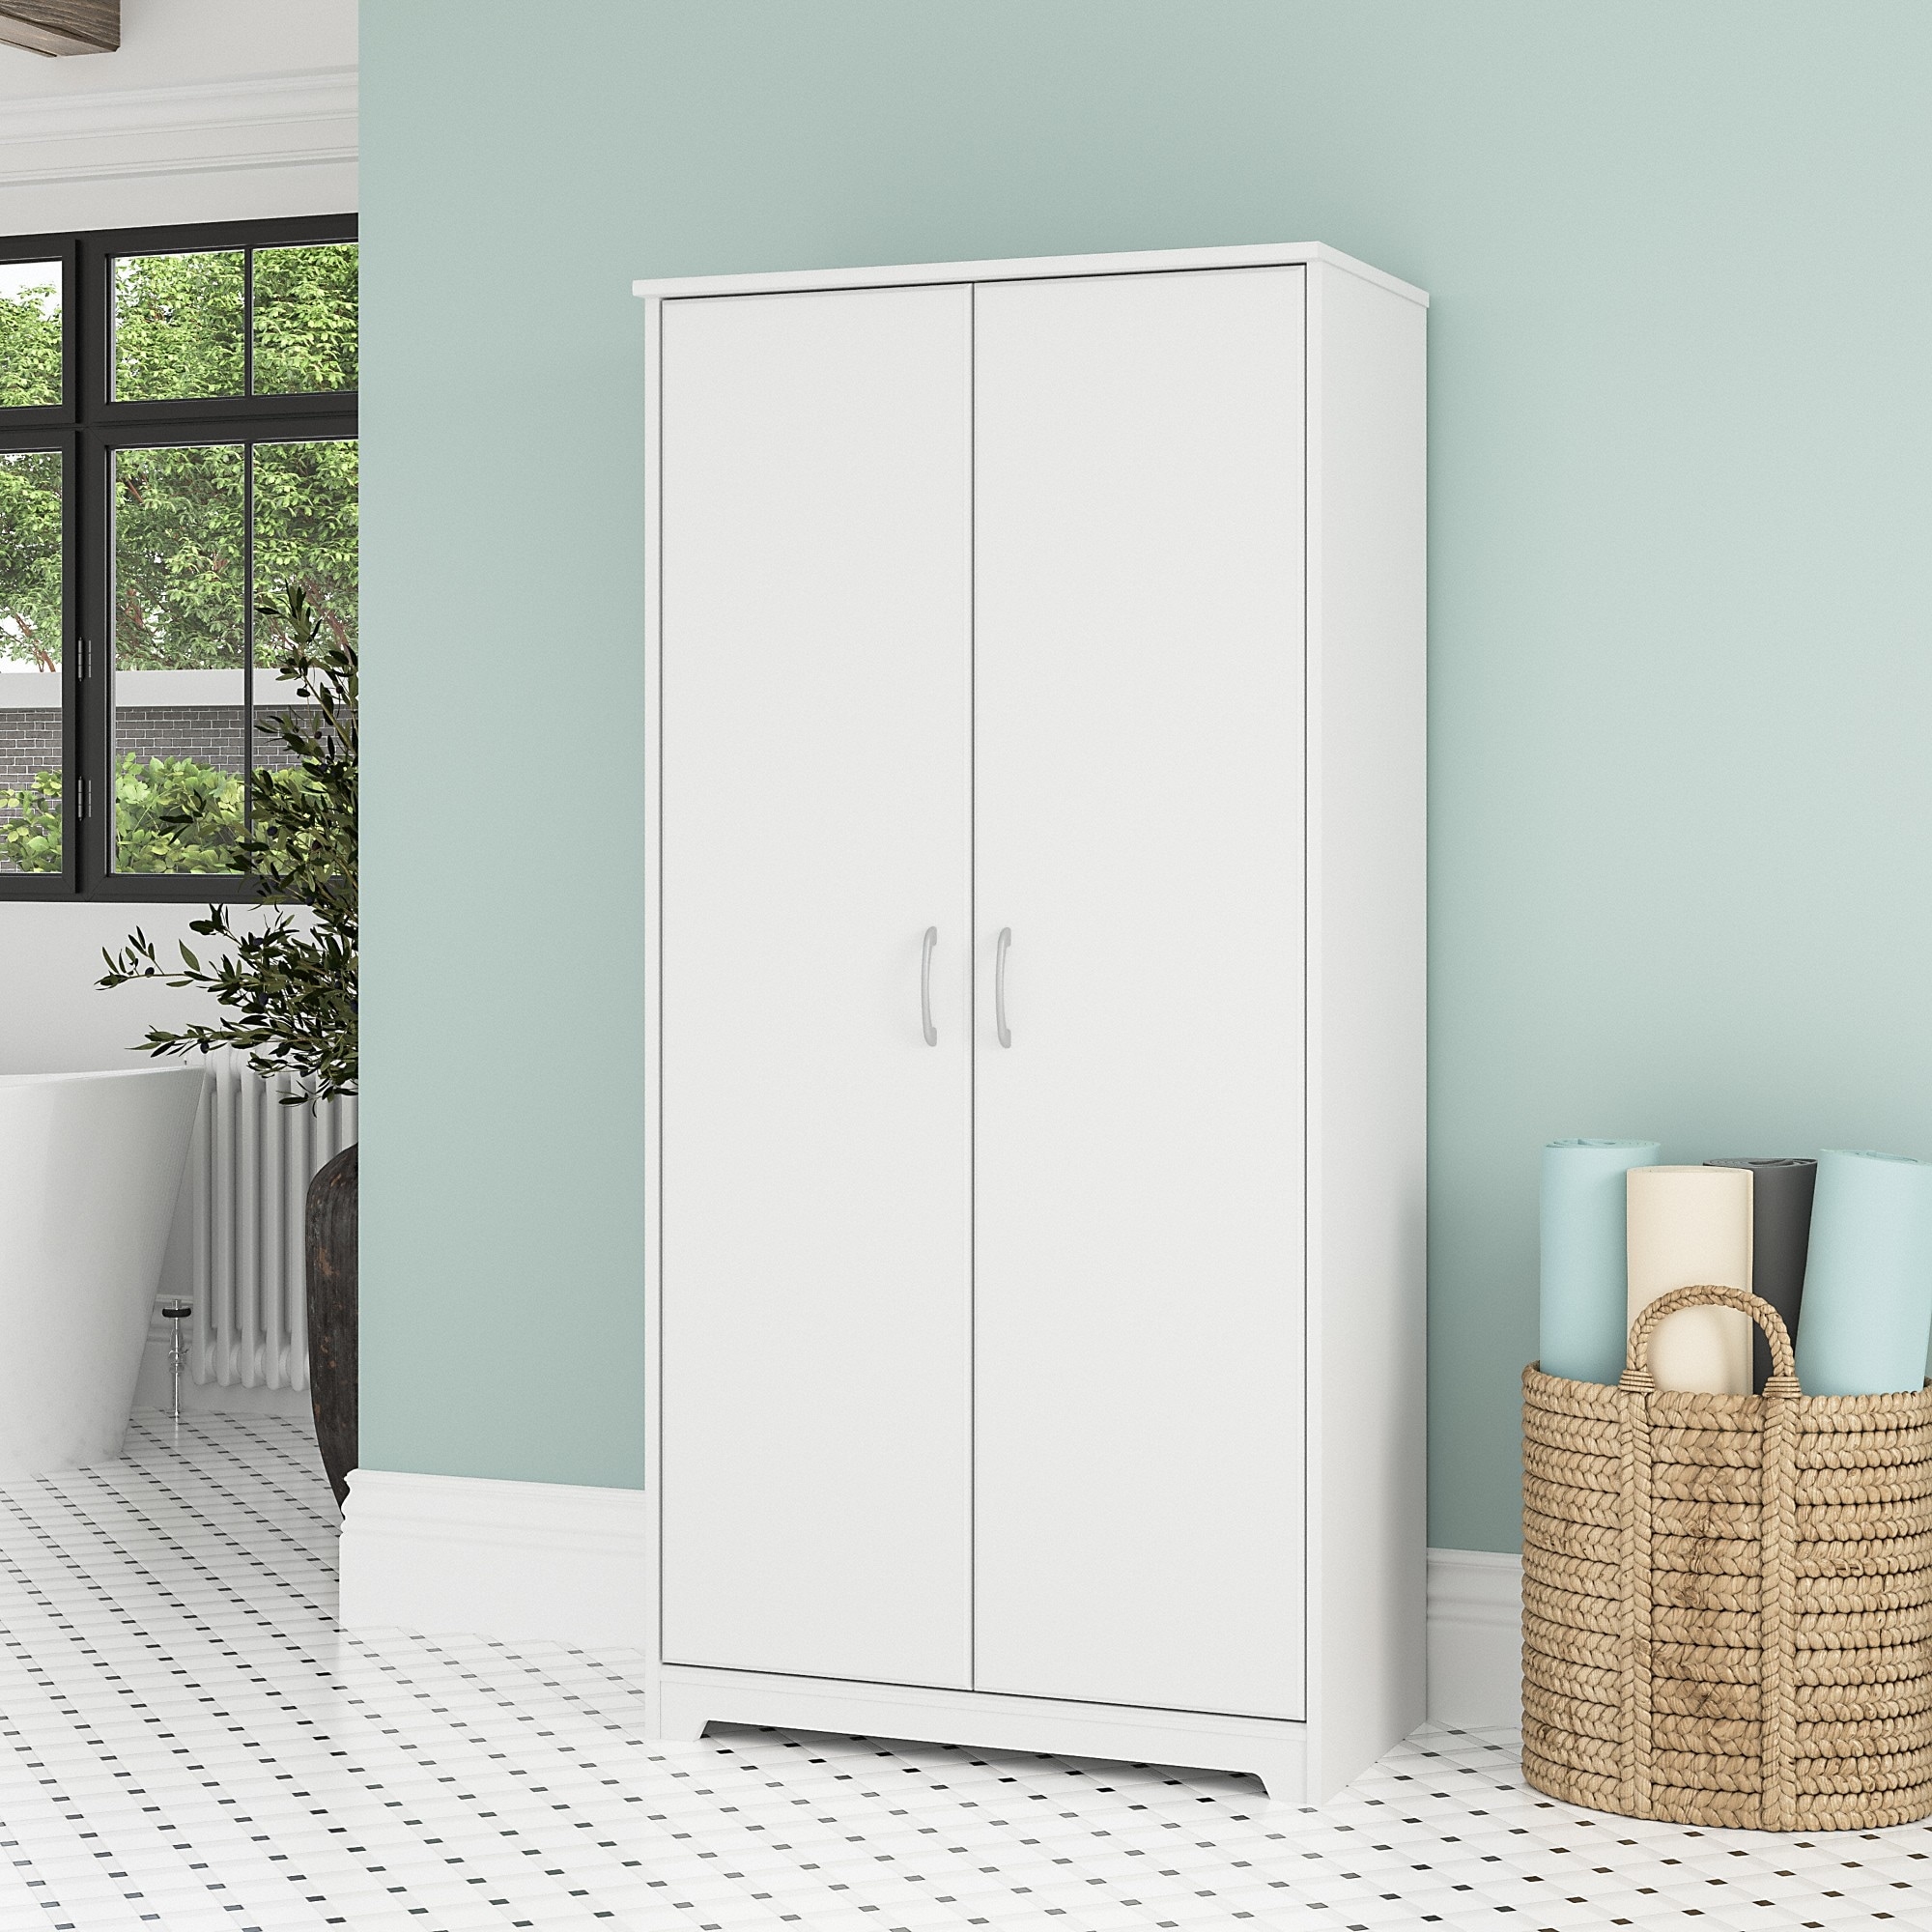 https://ak1.ostkcdn.com/images/products/is/images/direct/14ec2d062b5c726cd50835df2c7a8c0f0c12b19c/Cabot-Tall-Bathroom-Storage-Cabinet-with-Doors-by-Bush-Furniture.jpg